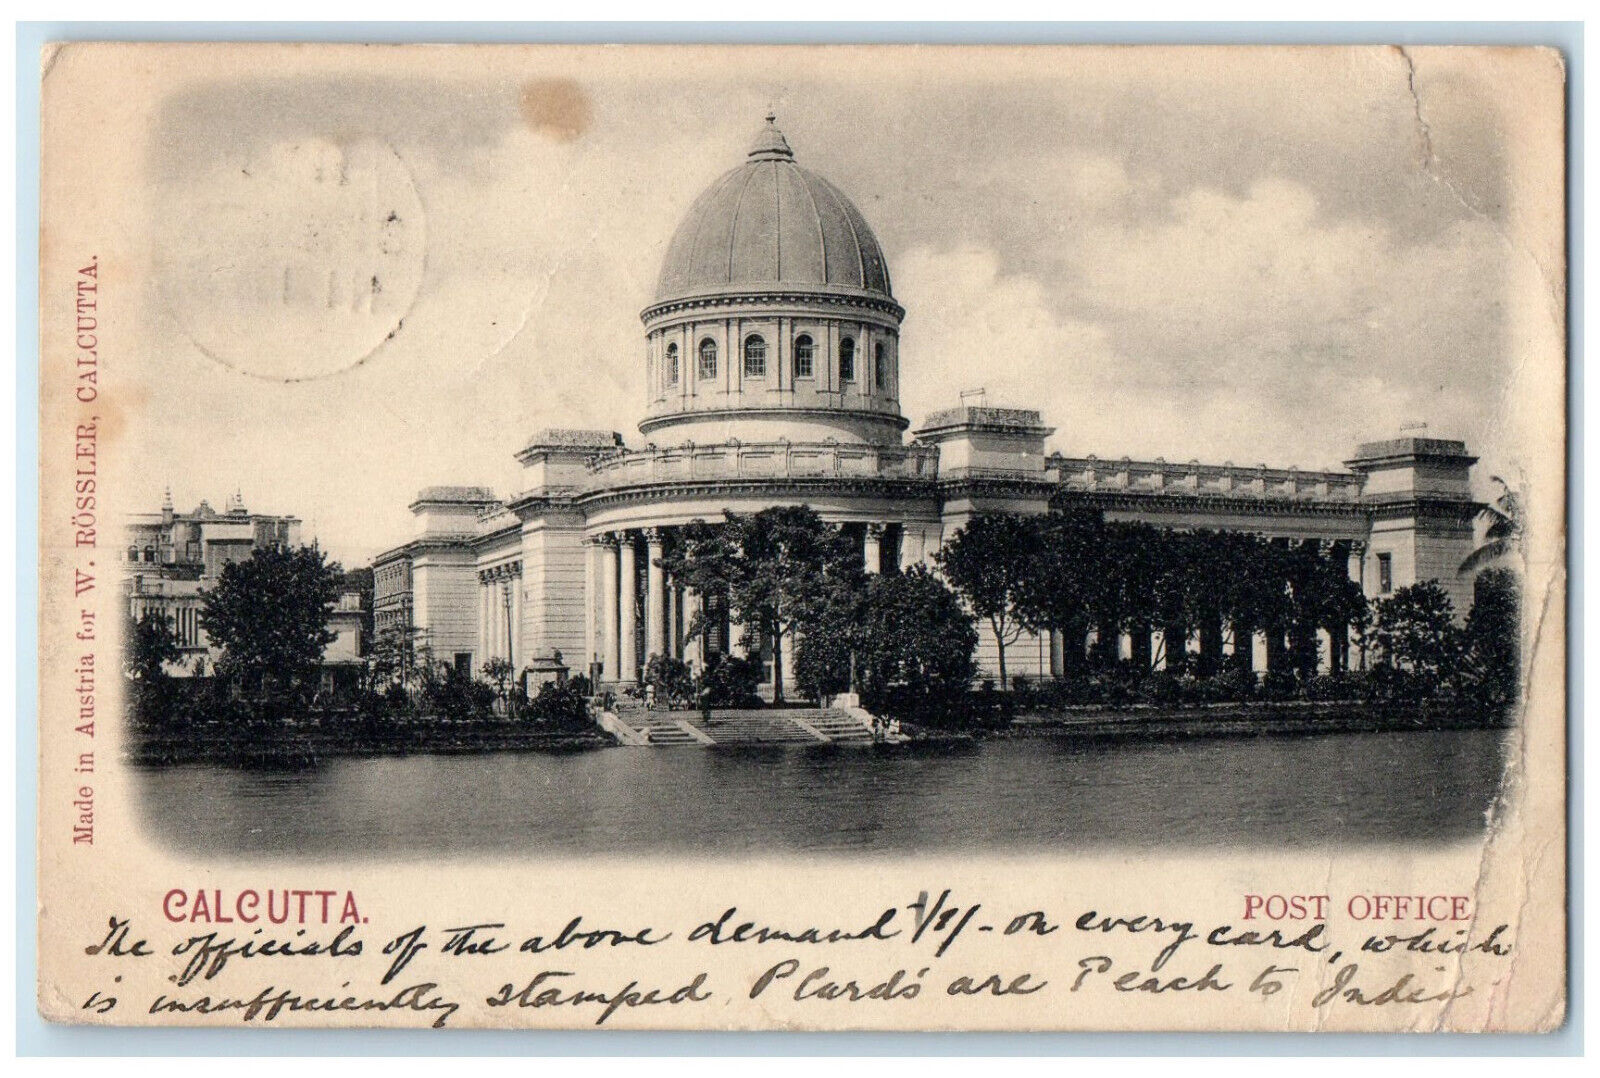 c1905 View of Post Office Calcutta (Kolkata) India Posted Antique Postcard